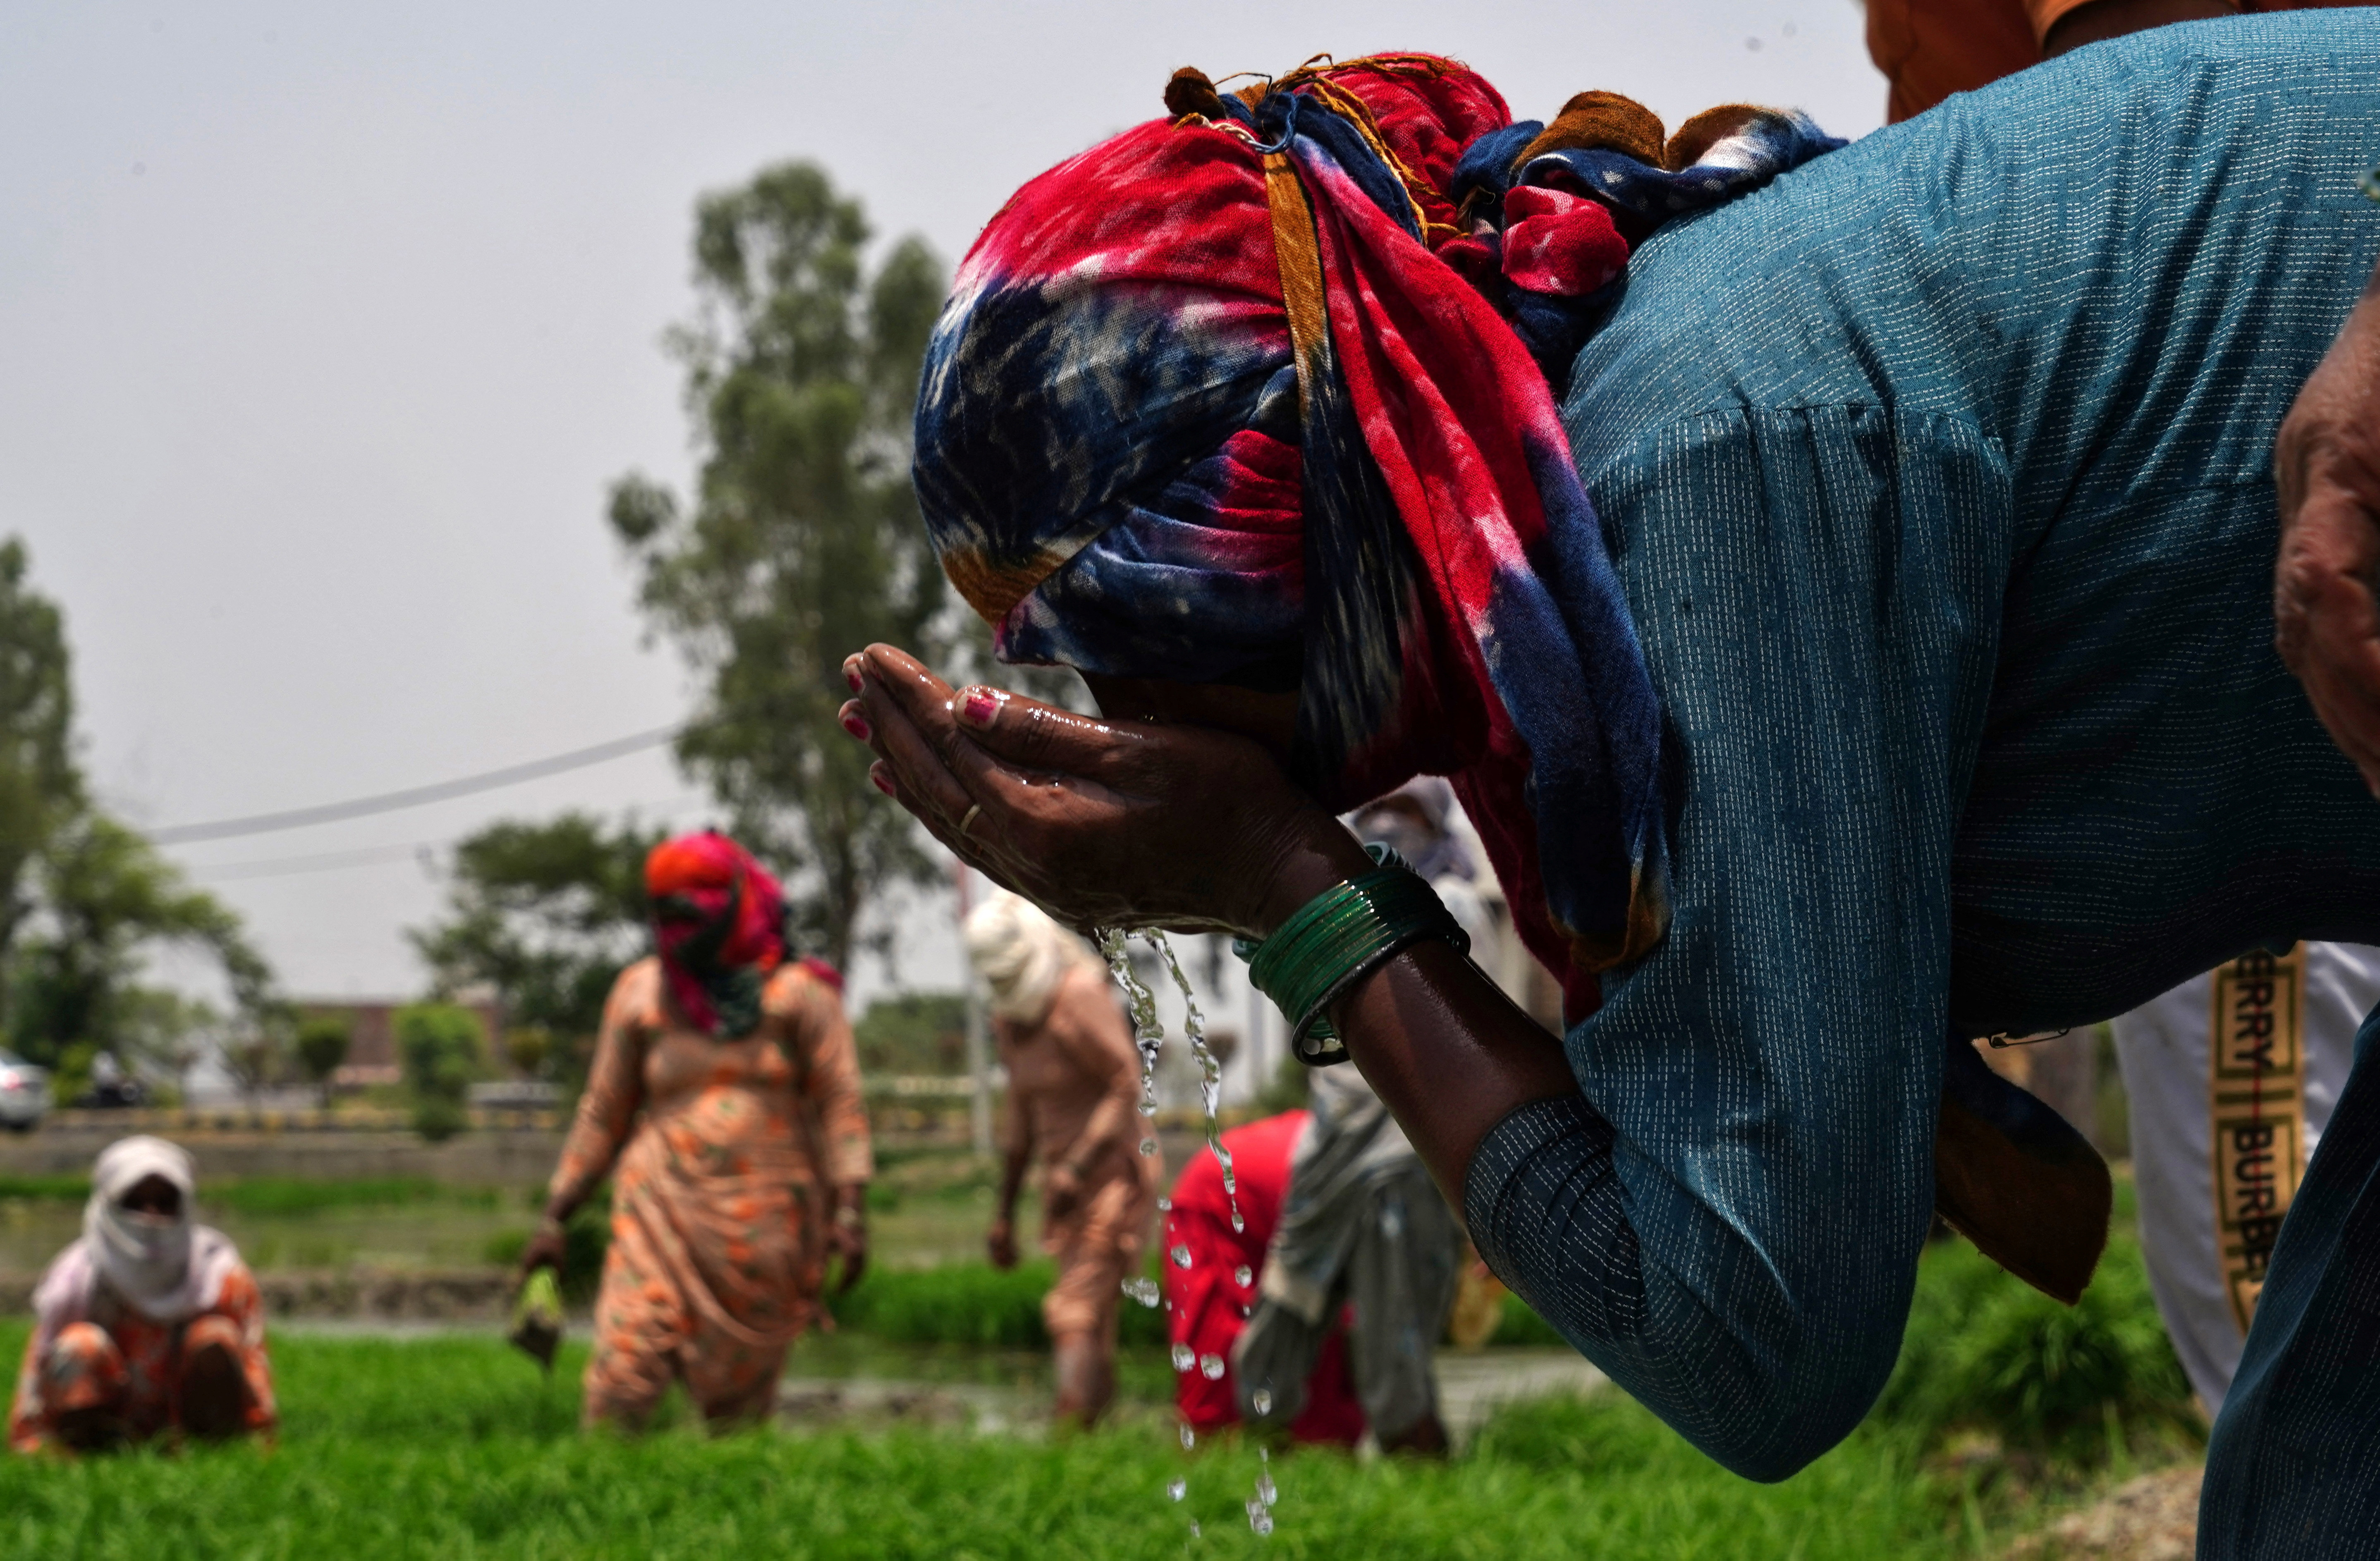 A farm labourer drinks water during a break amid work on a paddy field on a hot summer day in Karnal